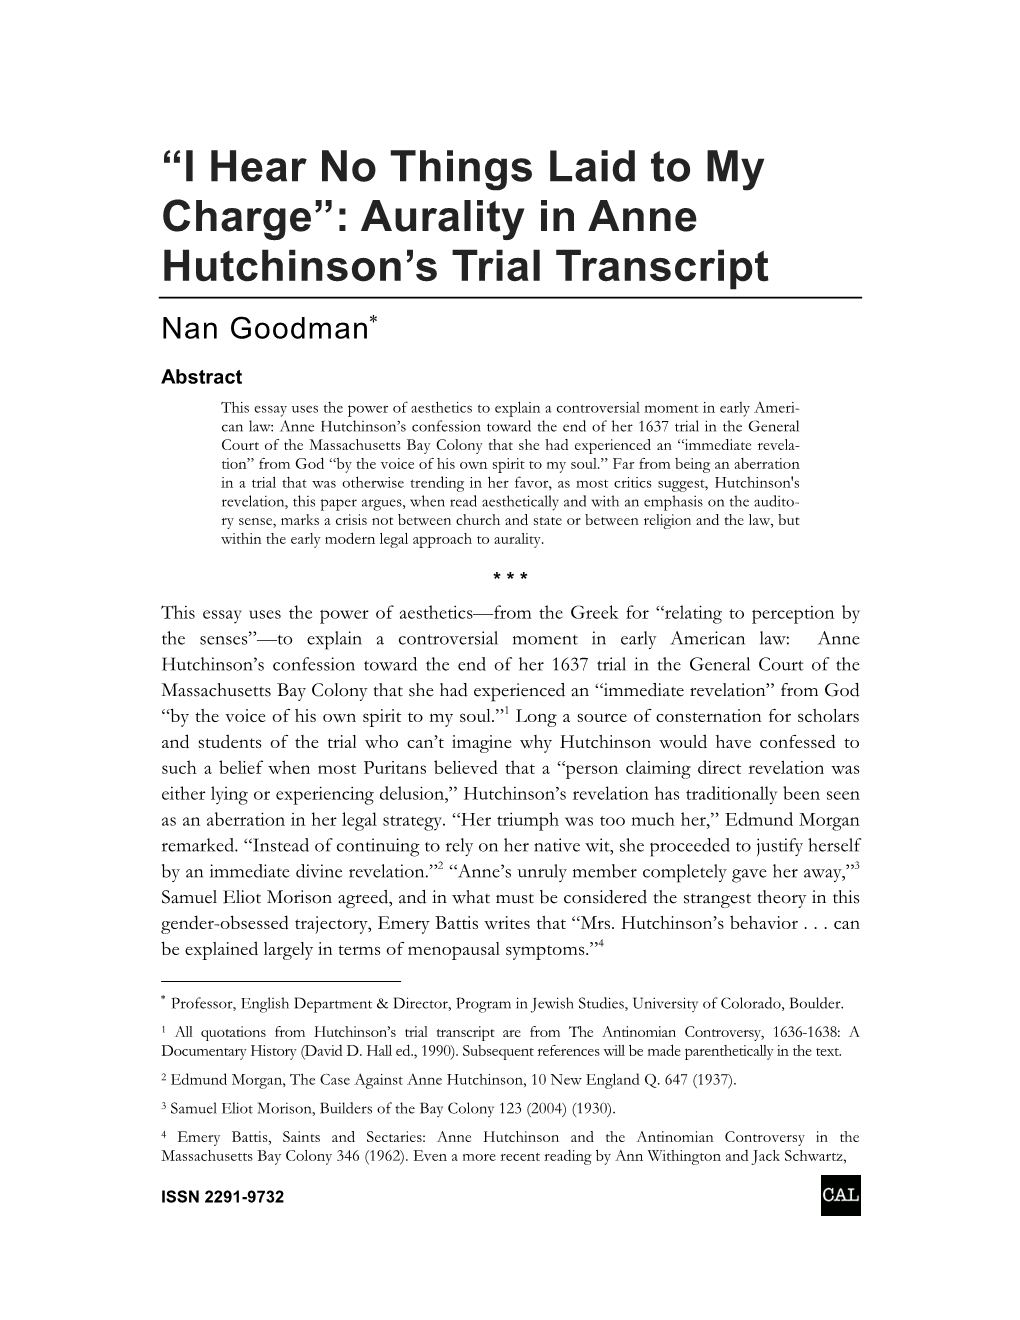 “I Hear No Things Laid to My Charge”: Aurality in Anne Hutchinson's Trial